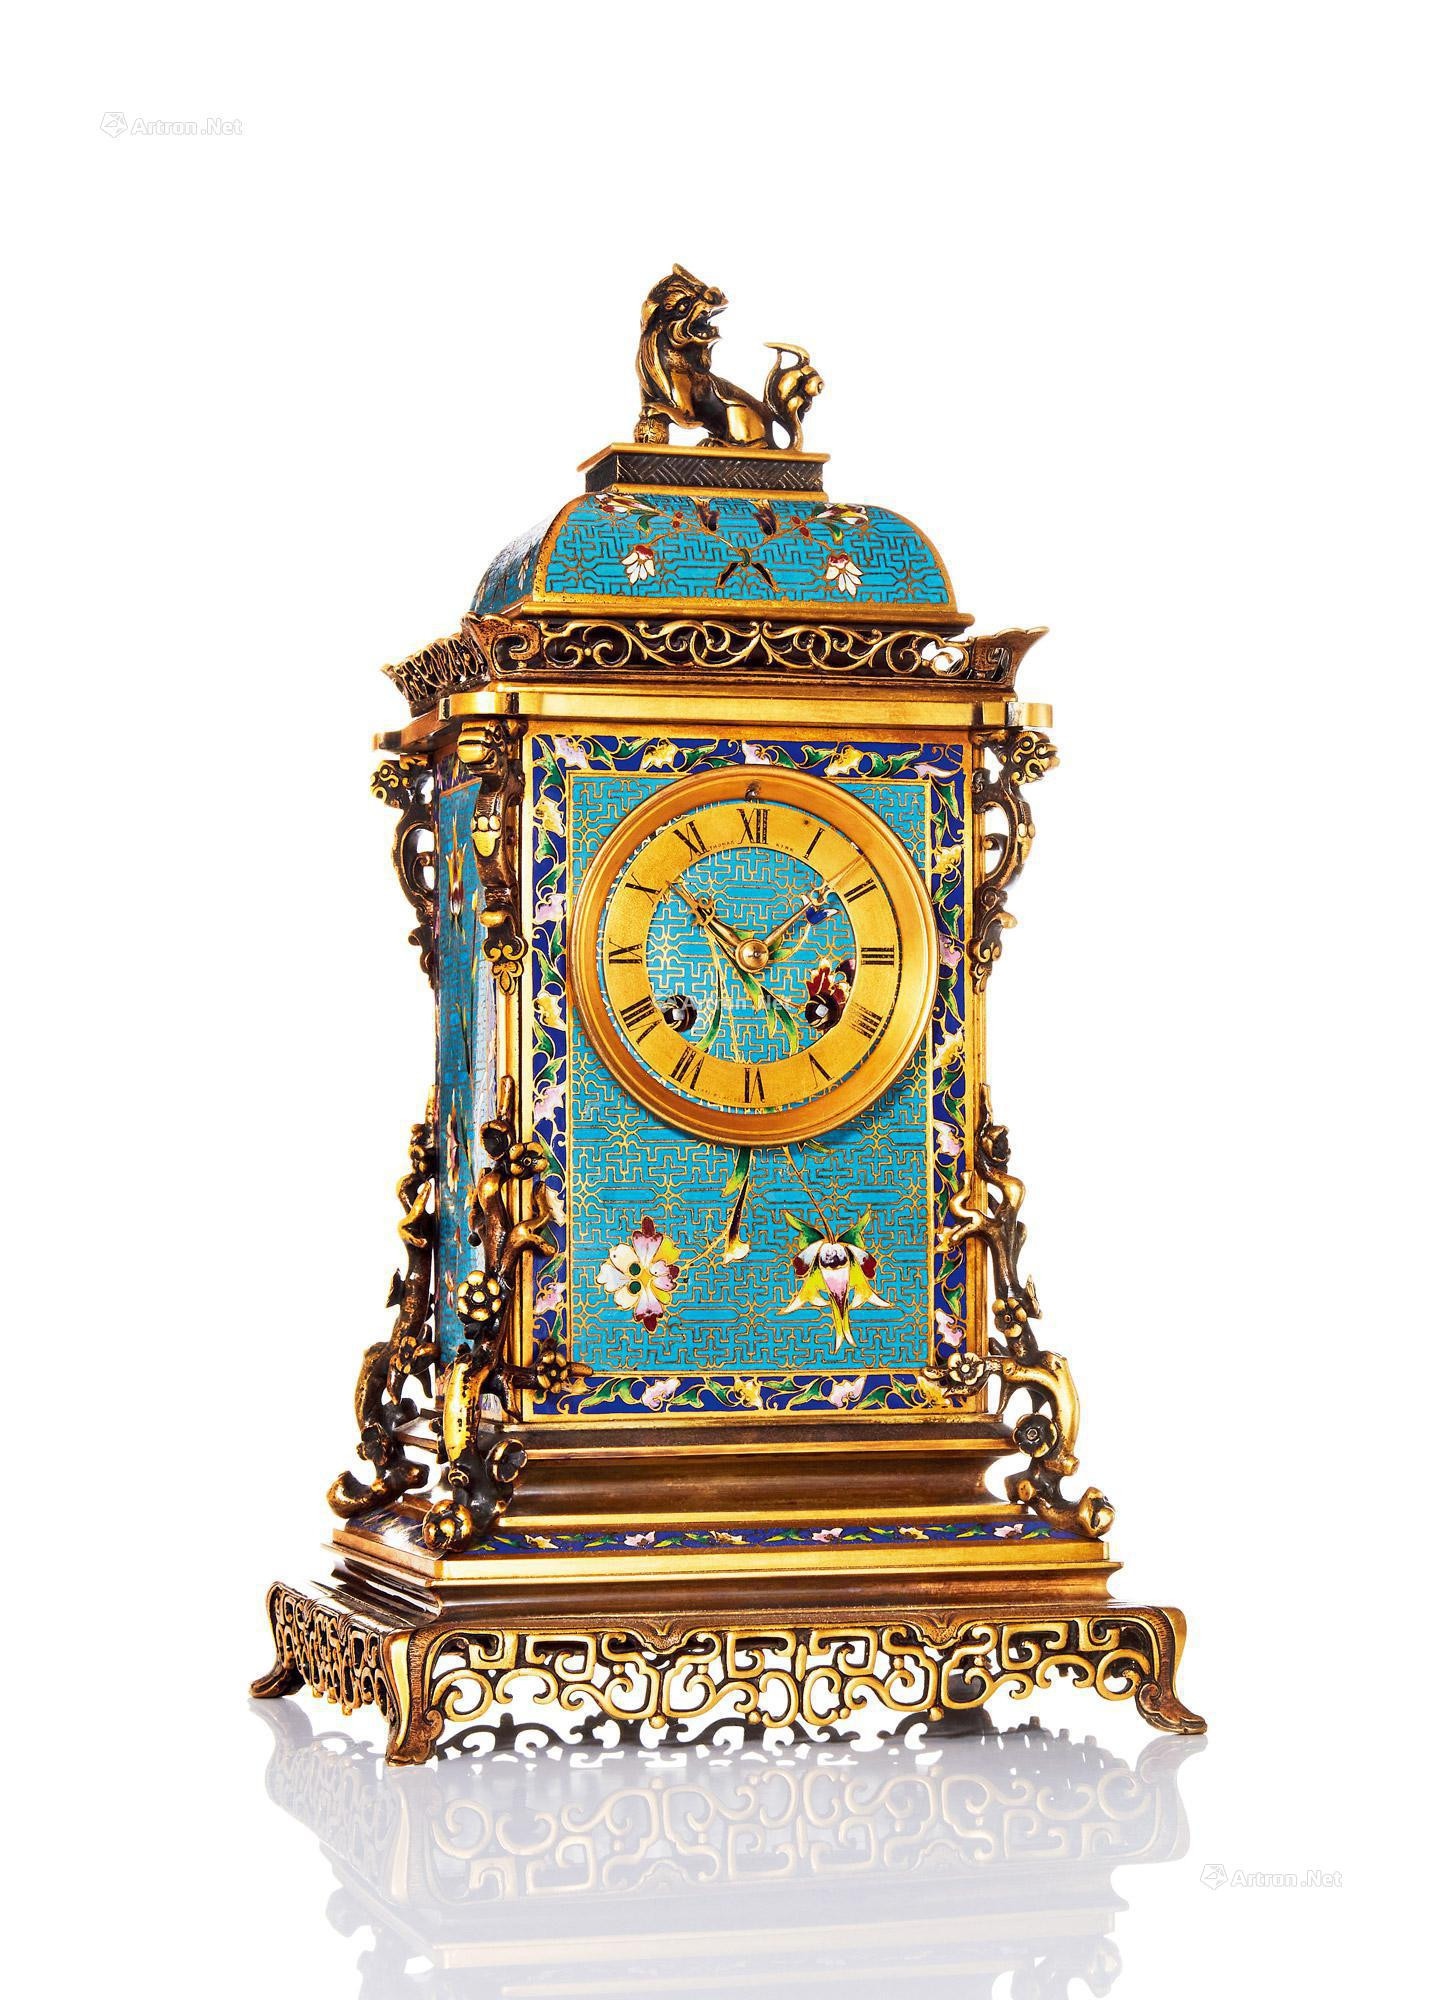 EUROPE  A FINE AND RARE BRASS ENAMEL TABLE CLOCK WITH FLORAL PATTERNS